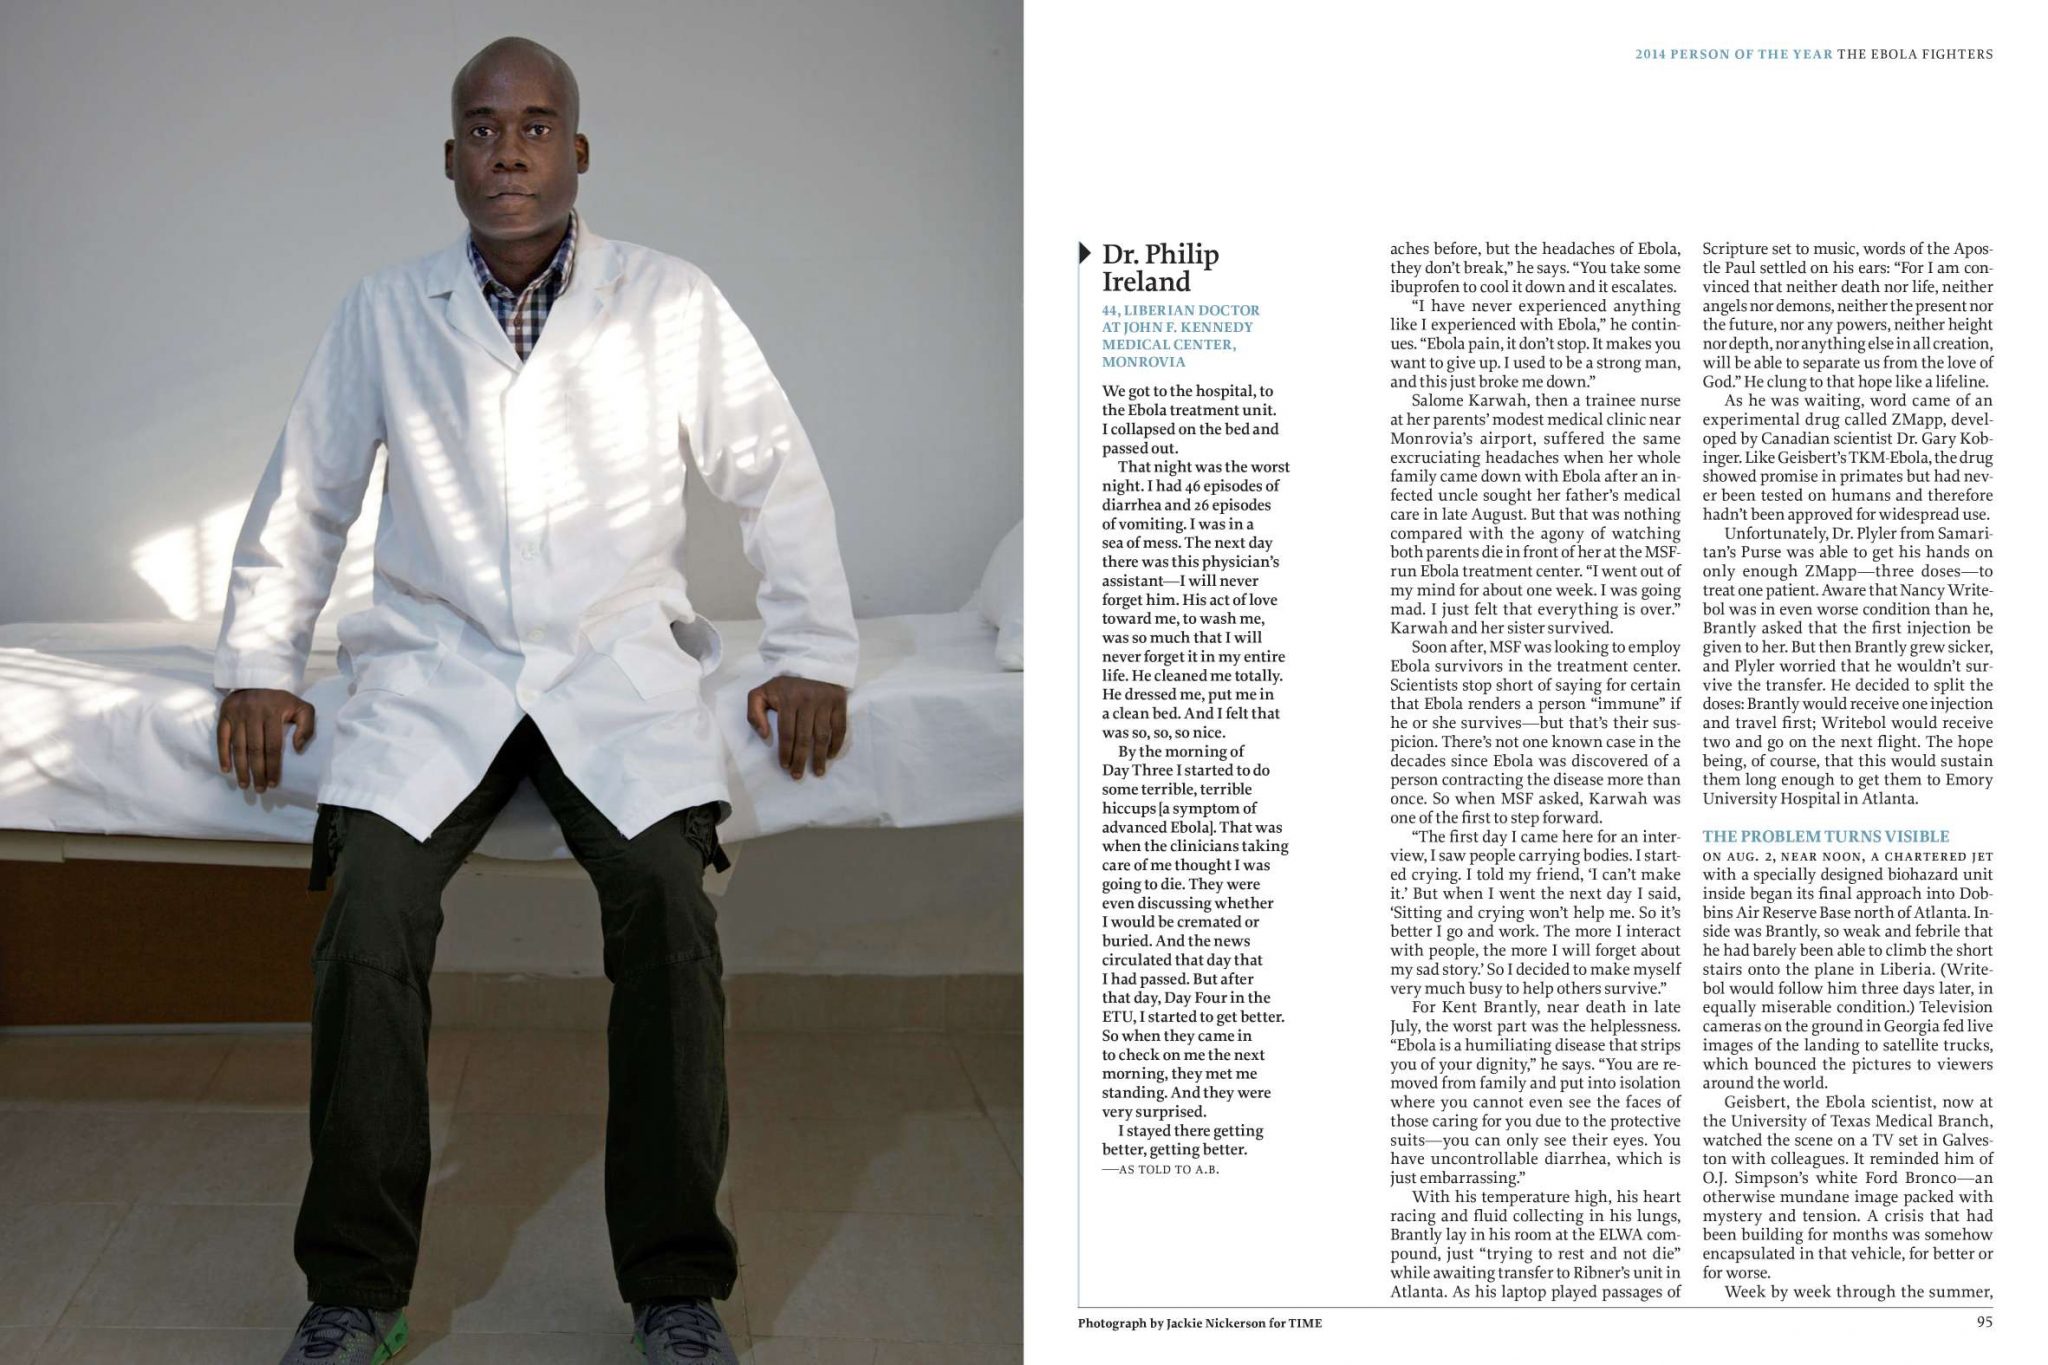  | Time Magazine: The Ebola Fighters | 8